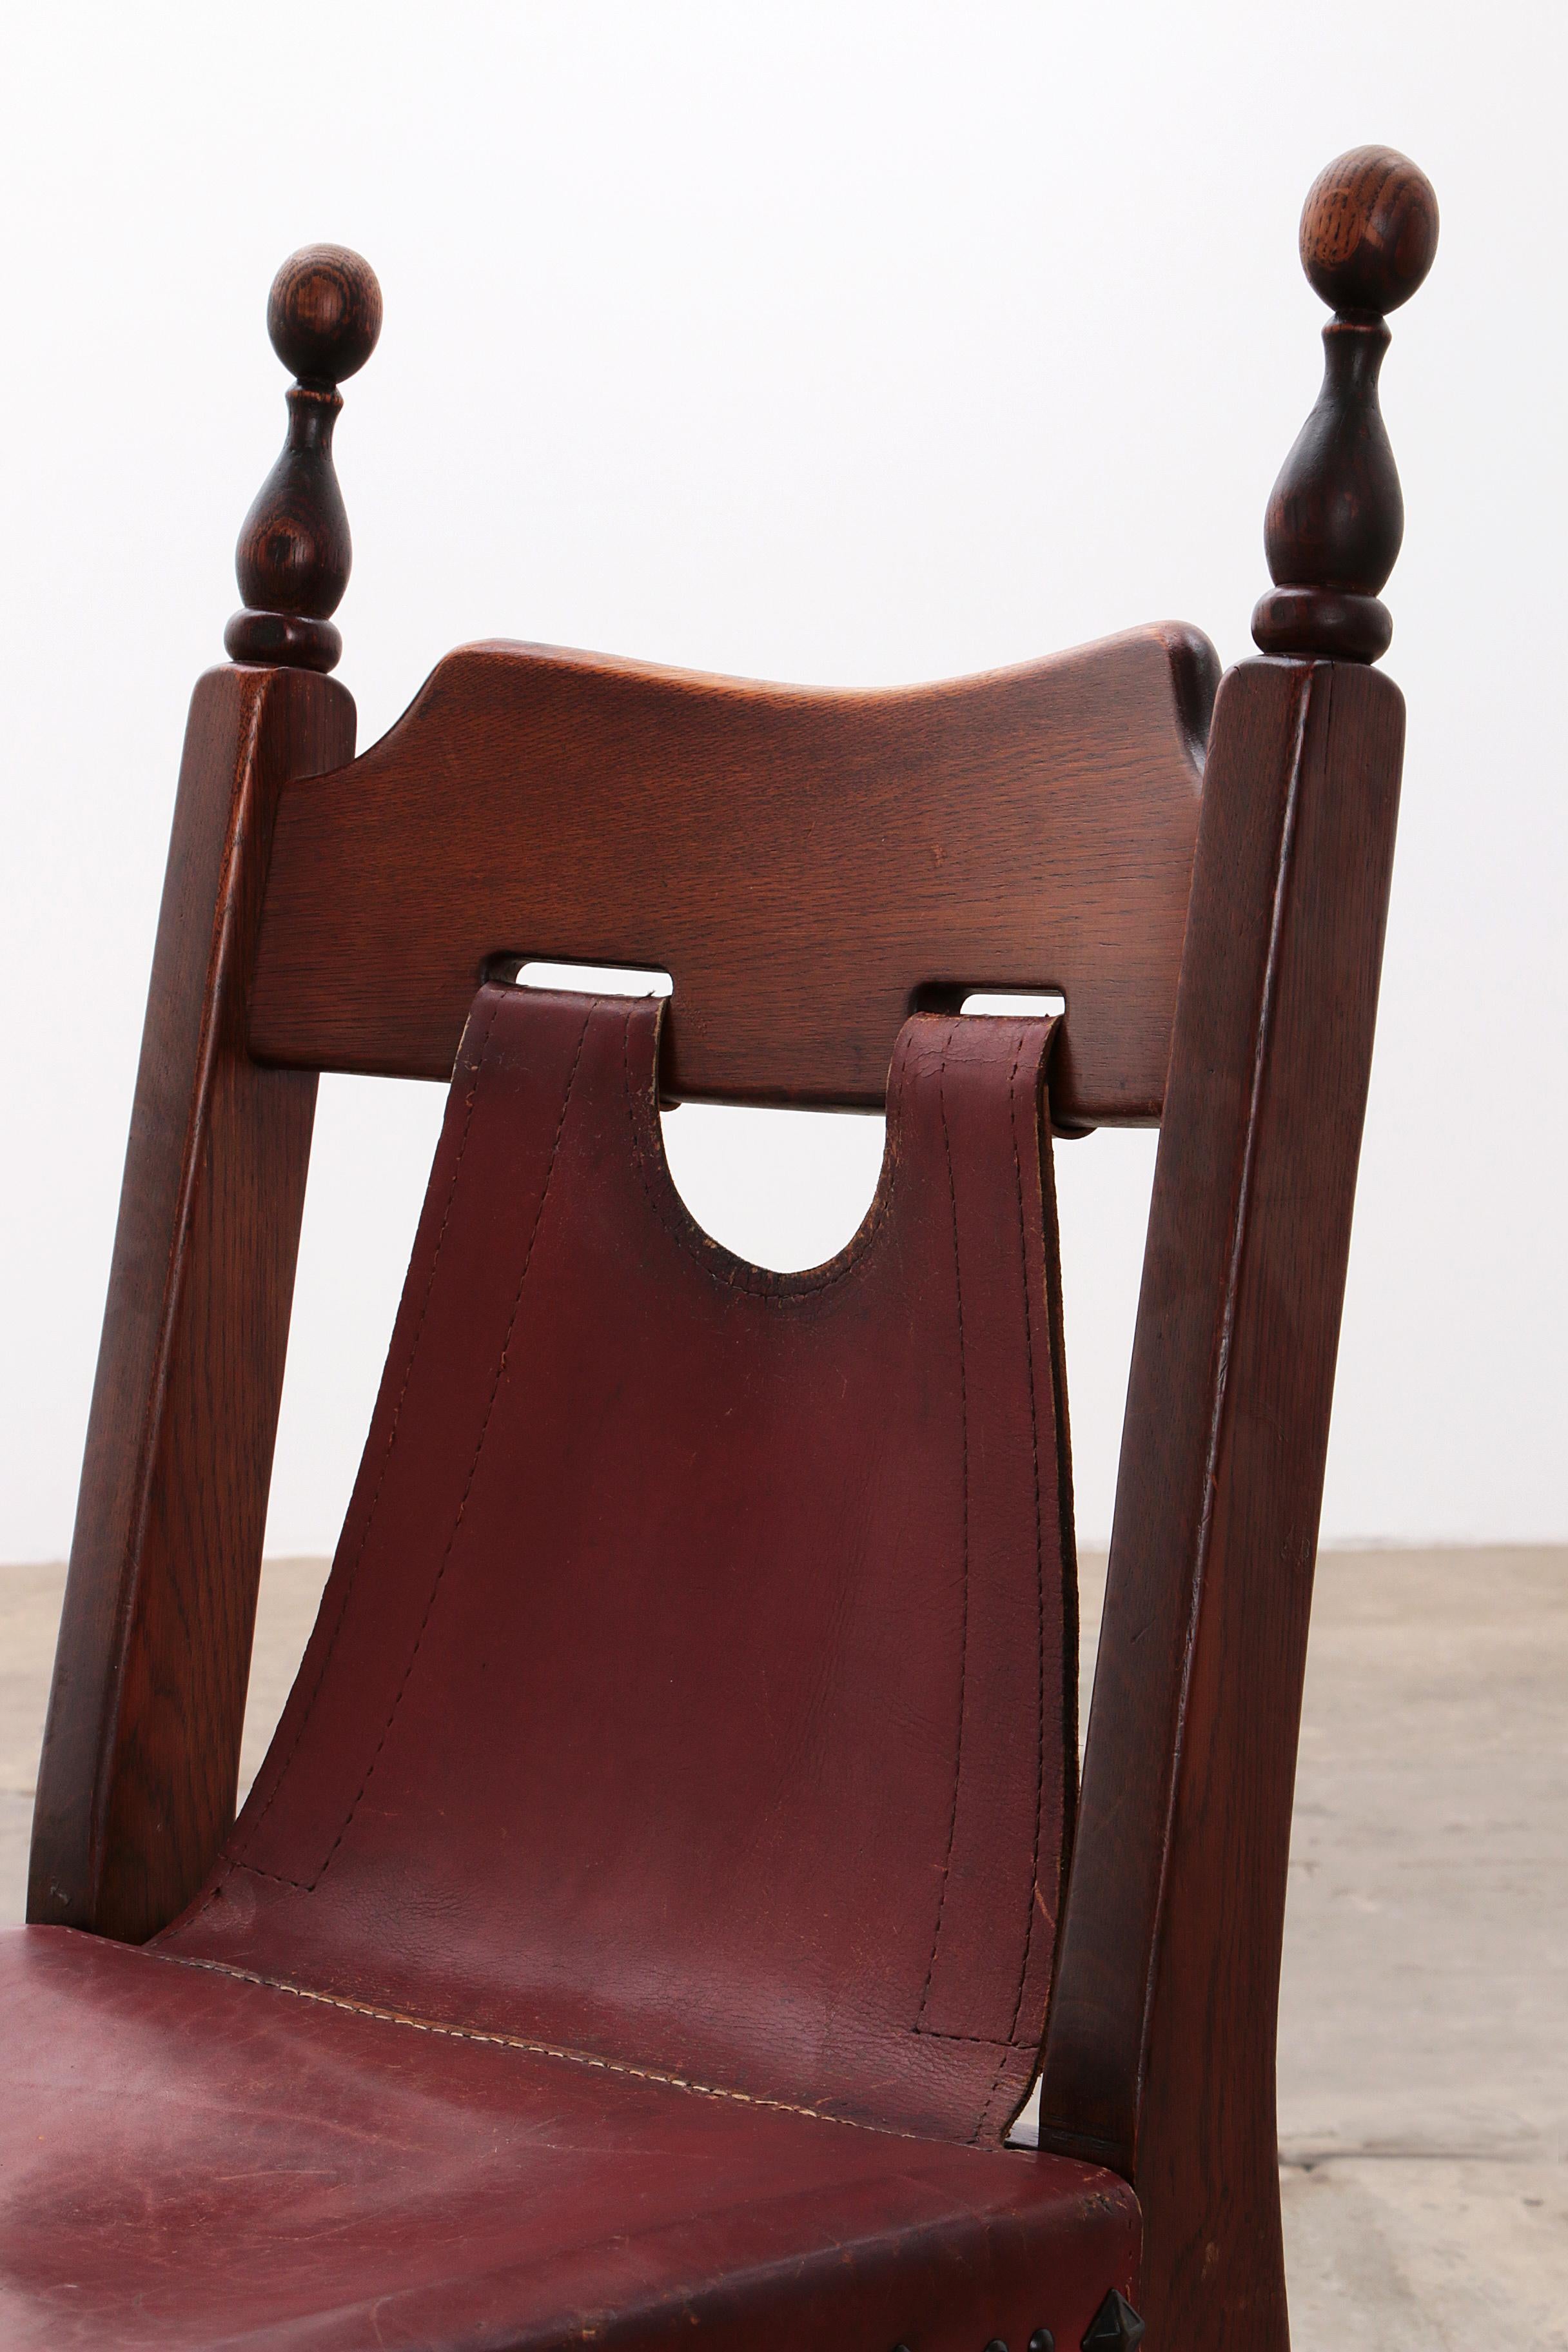 Spanish Chair Rustic Design with Saddle Leather 8